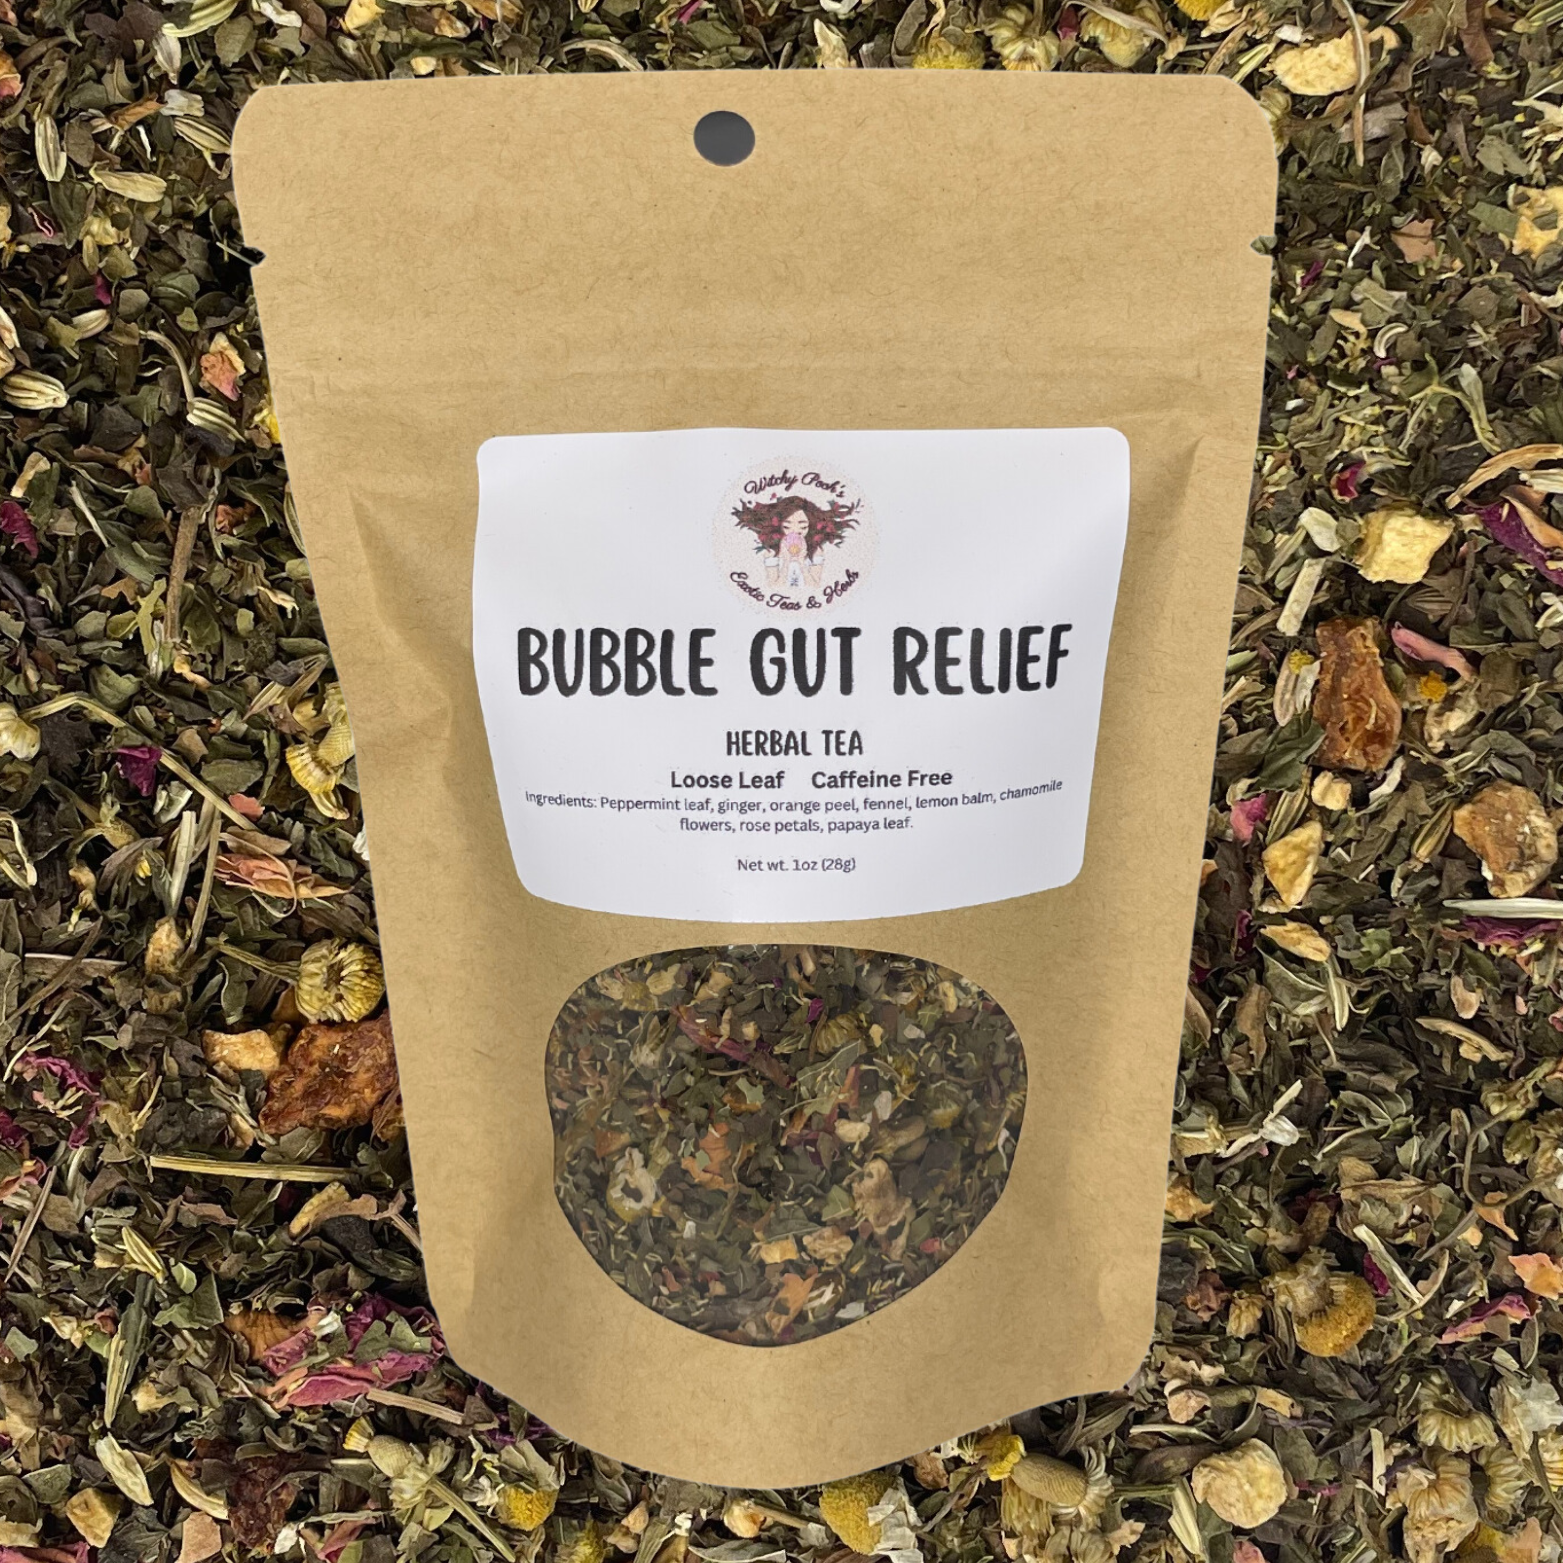 Witchy Pooh's Bubble Gut Relief Loose Leaf Herbal Functional Tea, Caffeine Free, For Digestive Issues-0